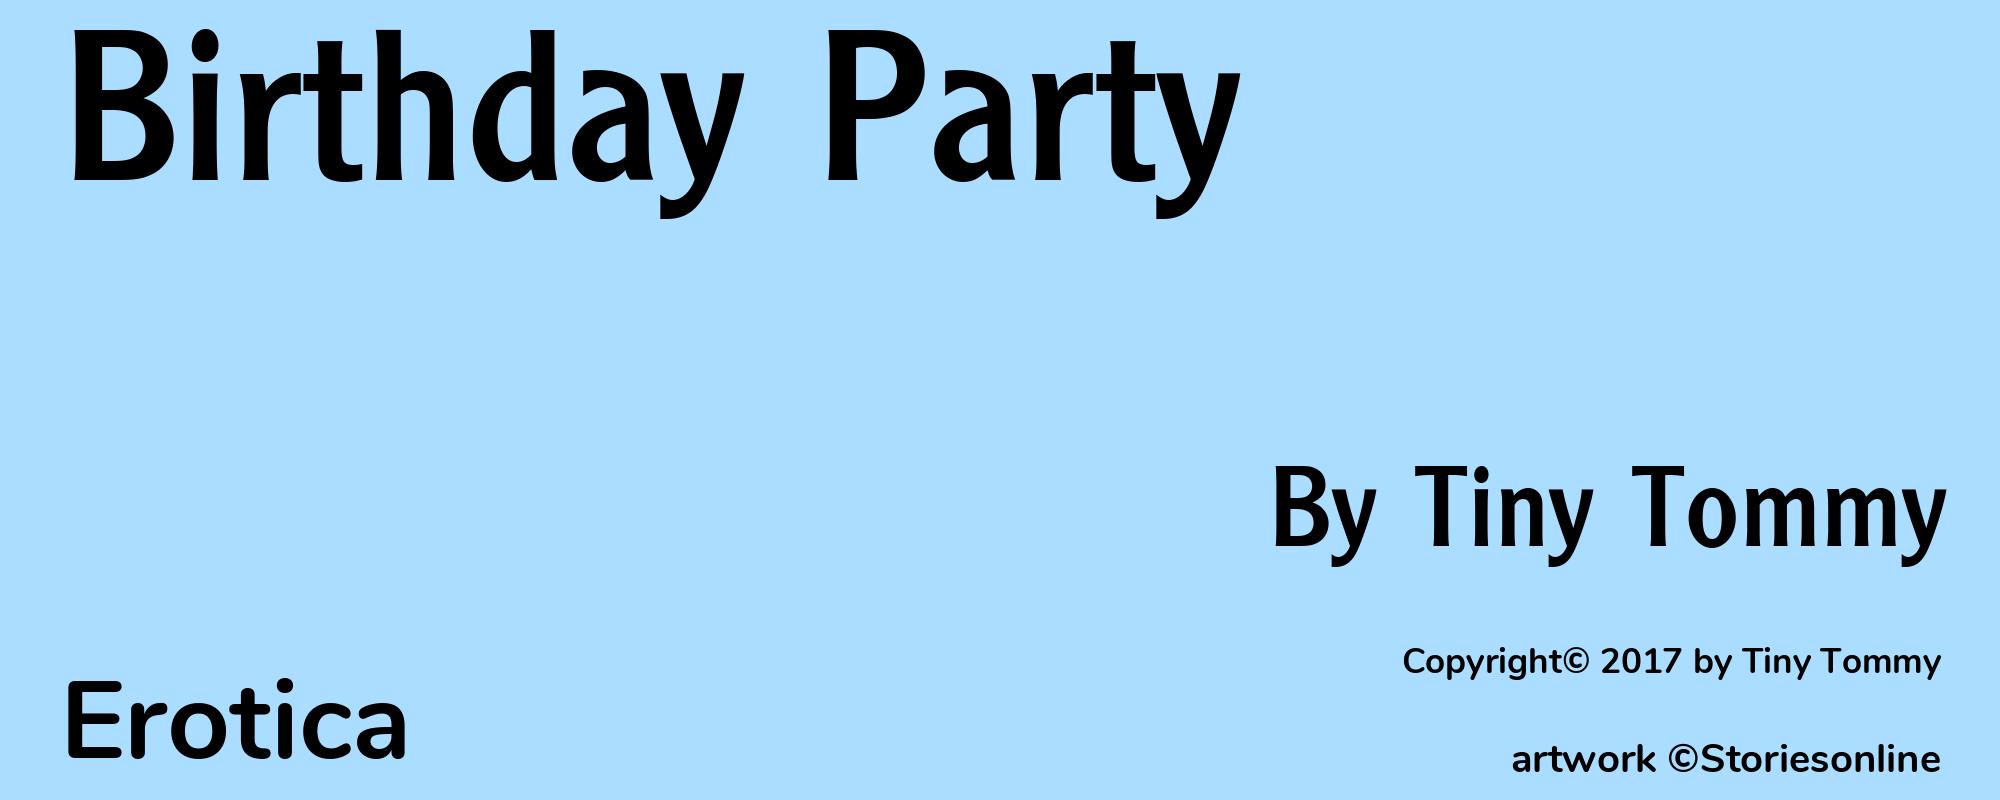 Birthday Party - Cover